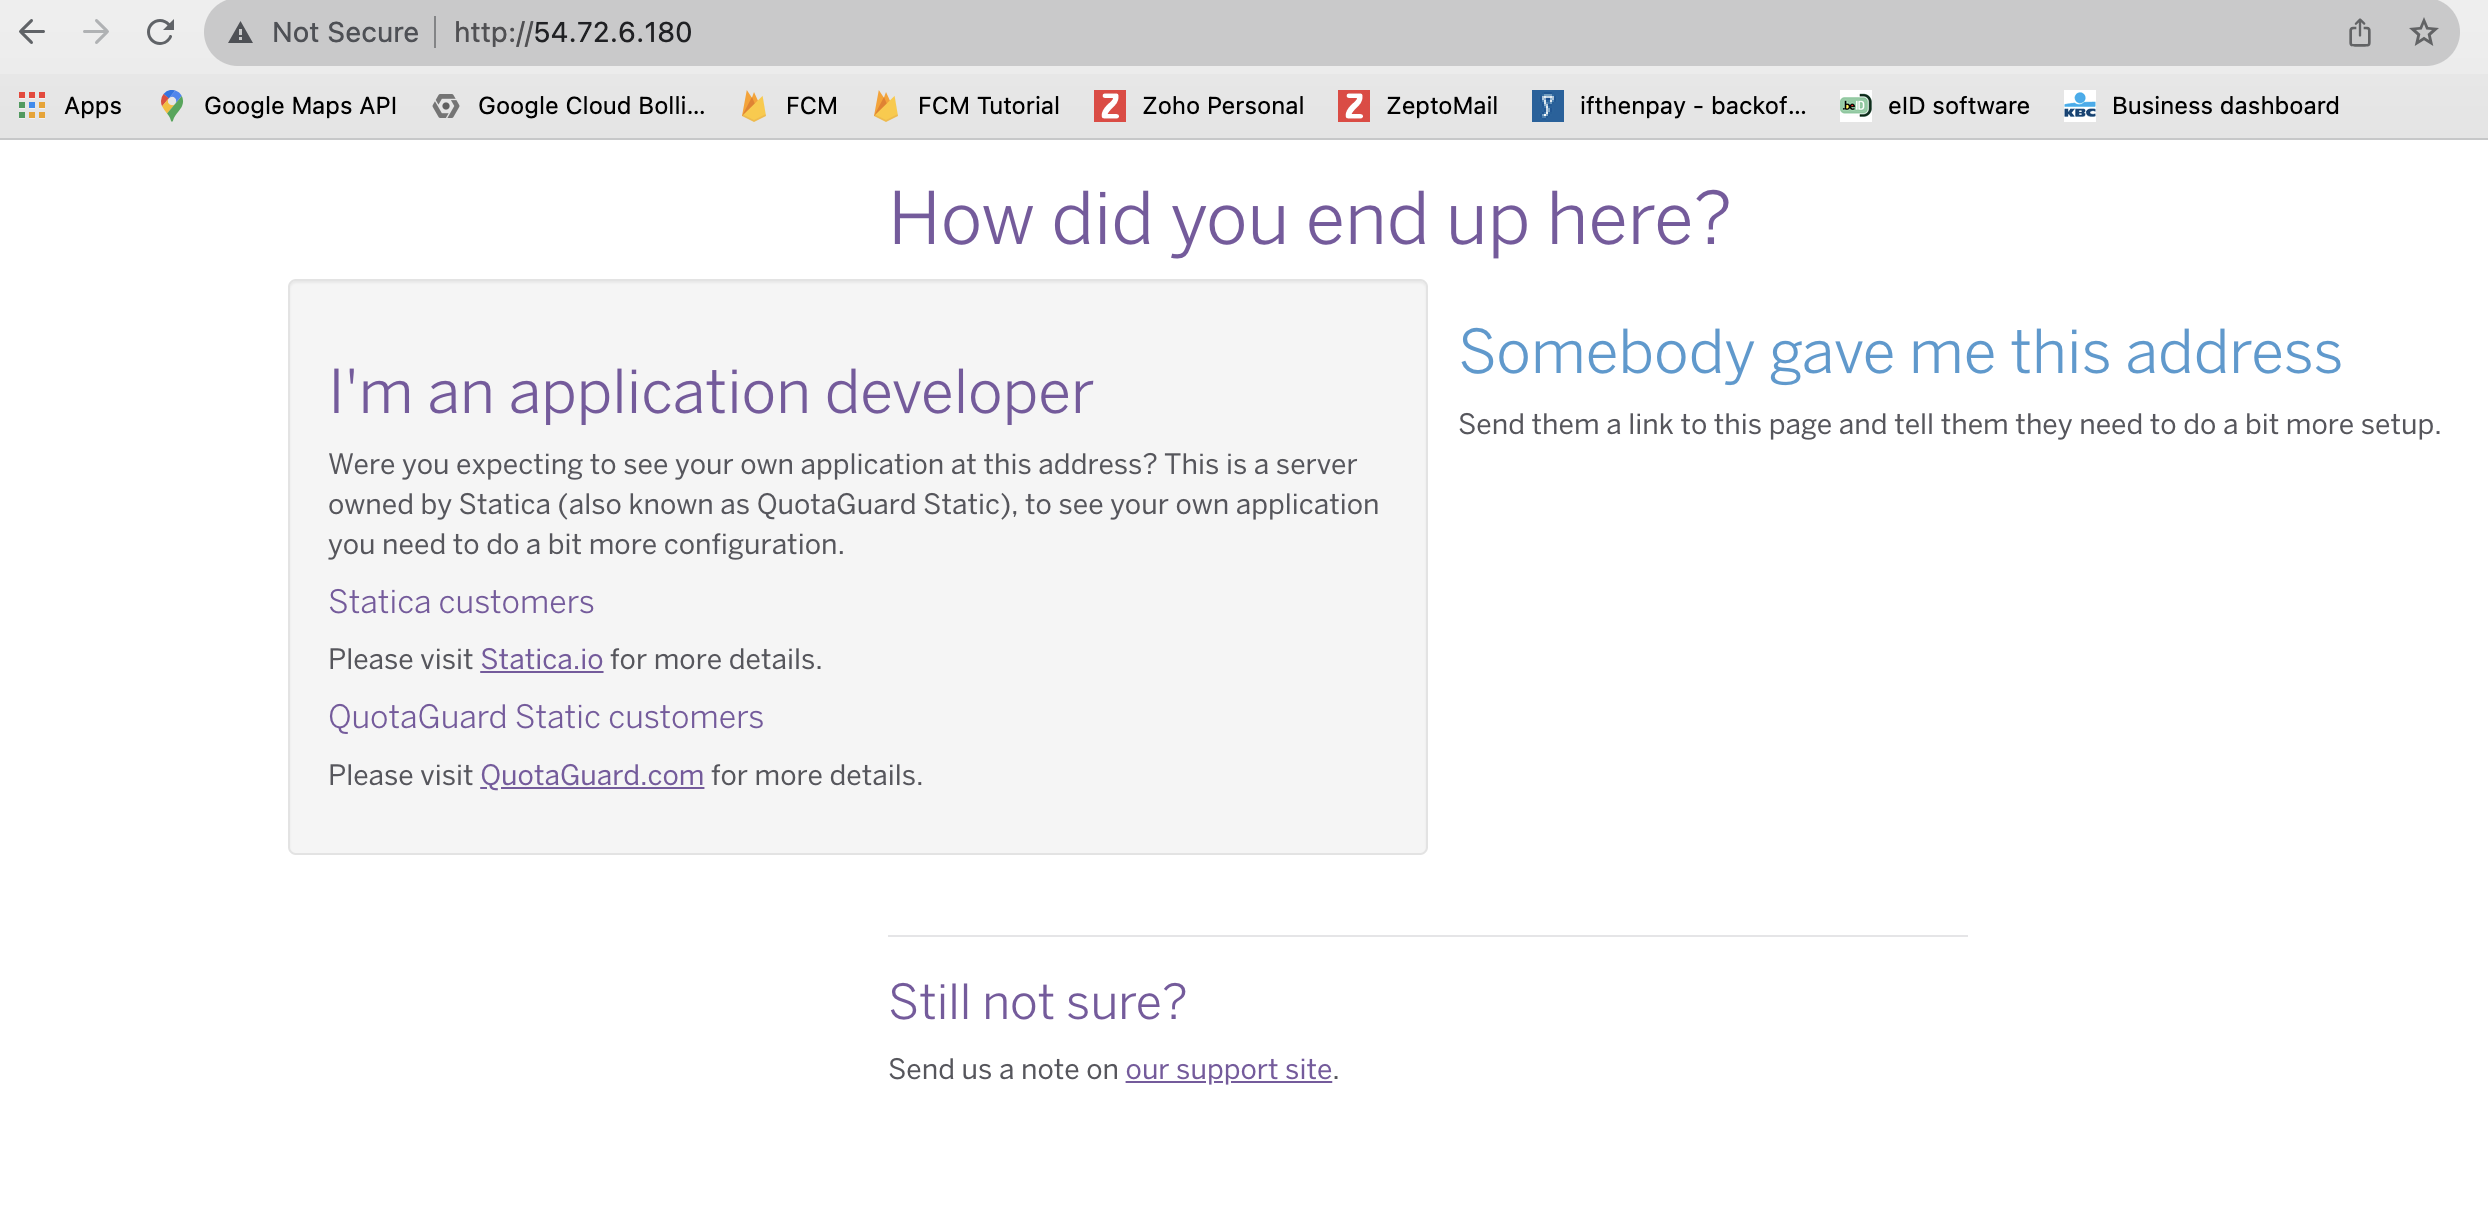 Heroku 'How did you end up here' error page when trying to use IP address directly